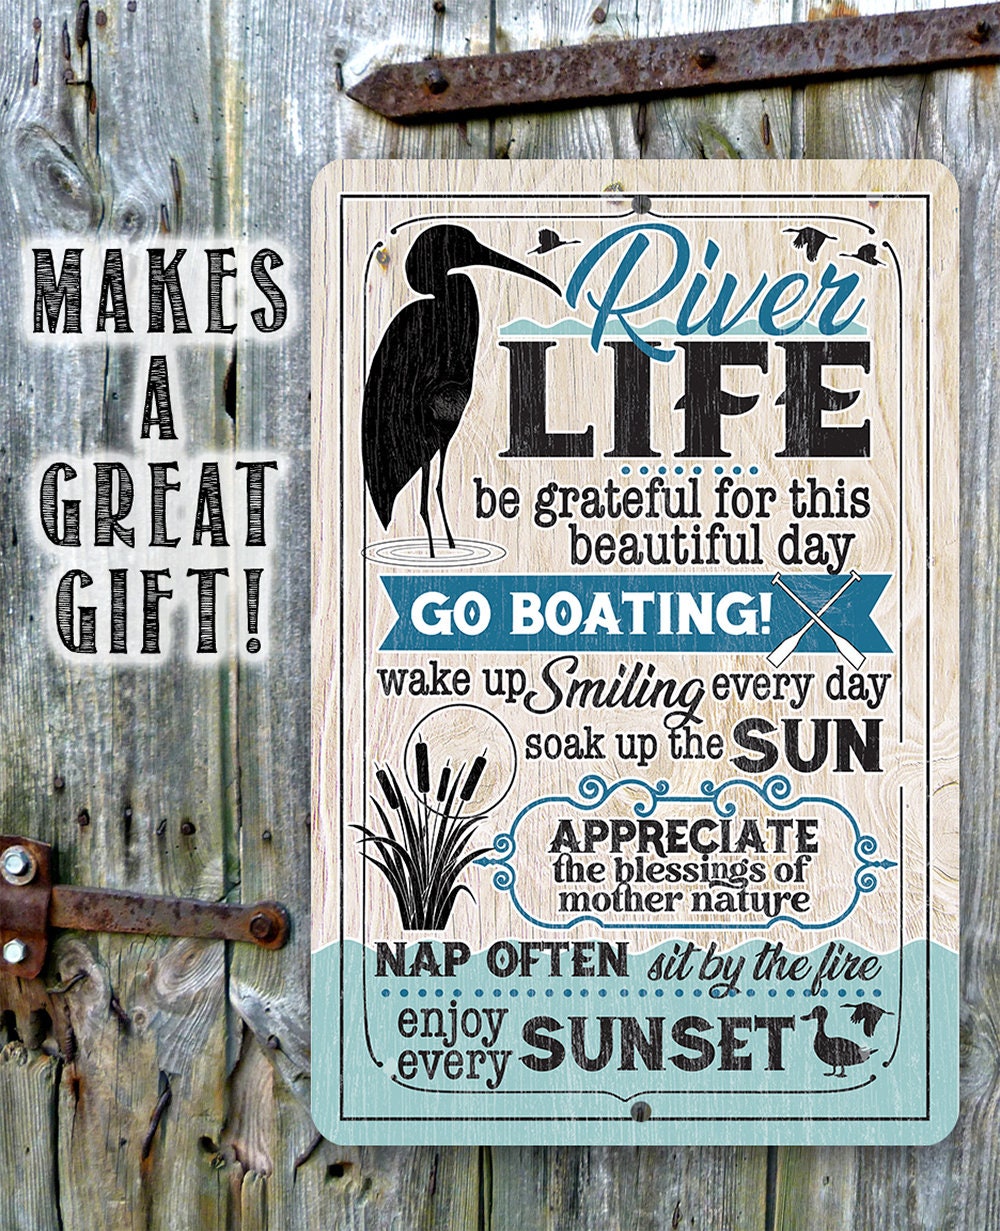 River Life - Inspirational Wall Art Quote Tin Signs, River Outdoor Decoration, 8" x 12" or 12" x 18" Aluminum Tin Awesome Metal Poster